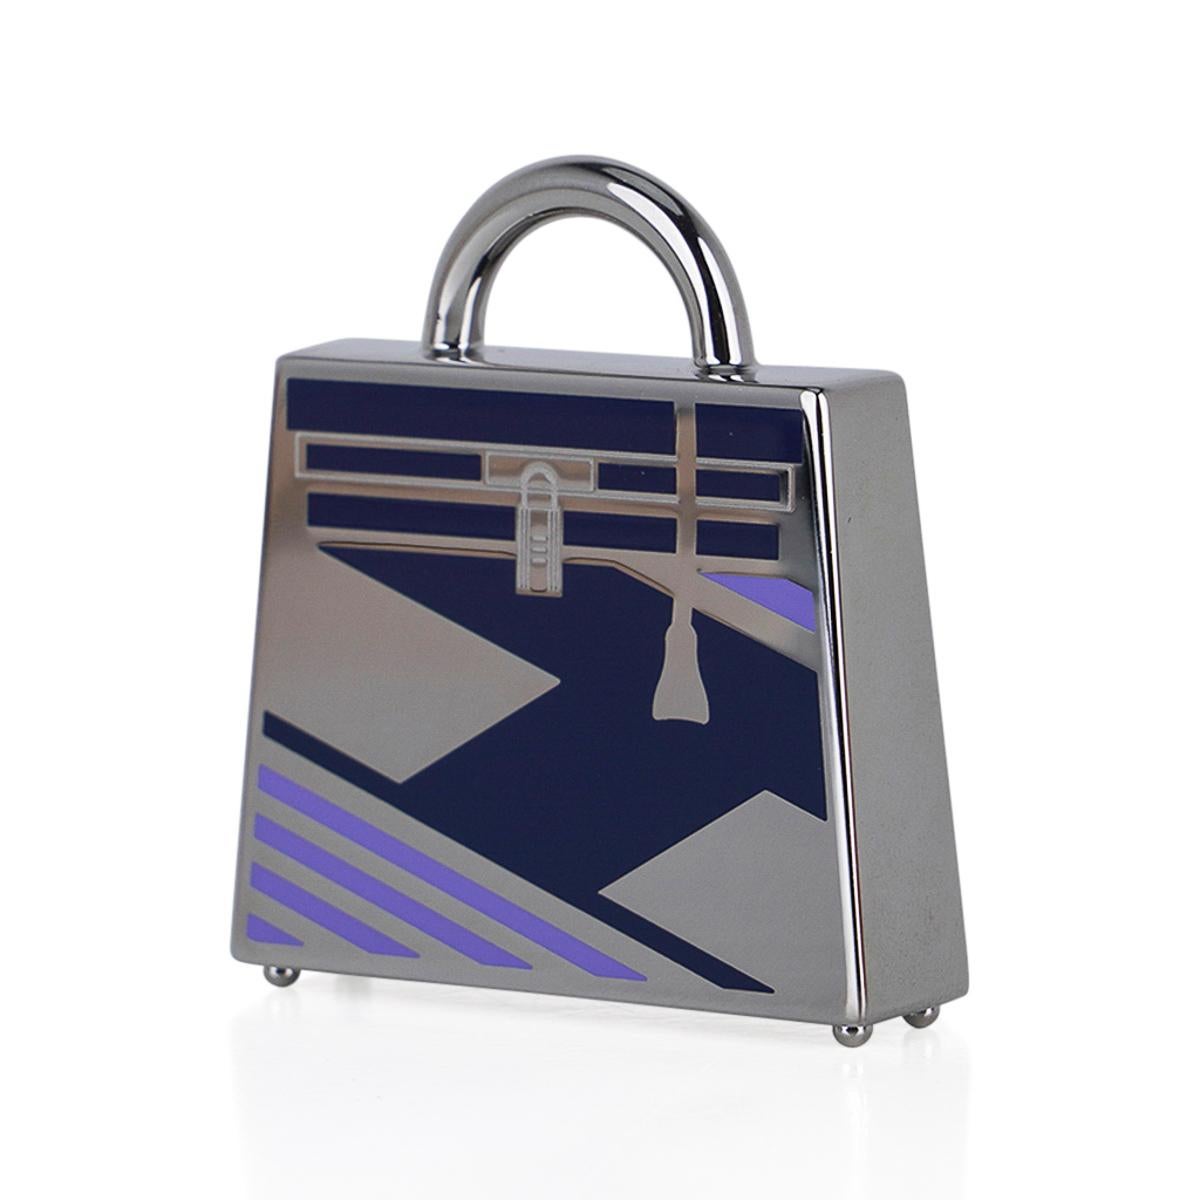 Mightychic offers an Hermes Curiosite Kelly Laque H Vibration charm featured in Lilas with Palladium plated hardware.
Shaped like a Kelly Bag, the charm is beautifully lacquered and engraved!
Featuring the H Vibration motif.
Designed as a necklace